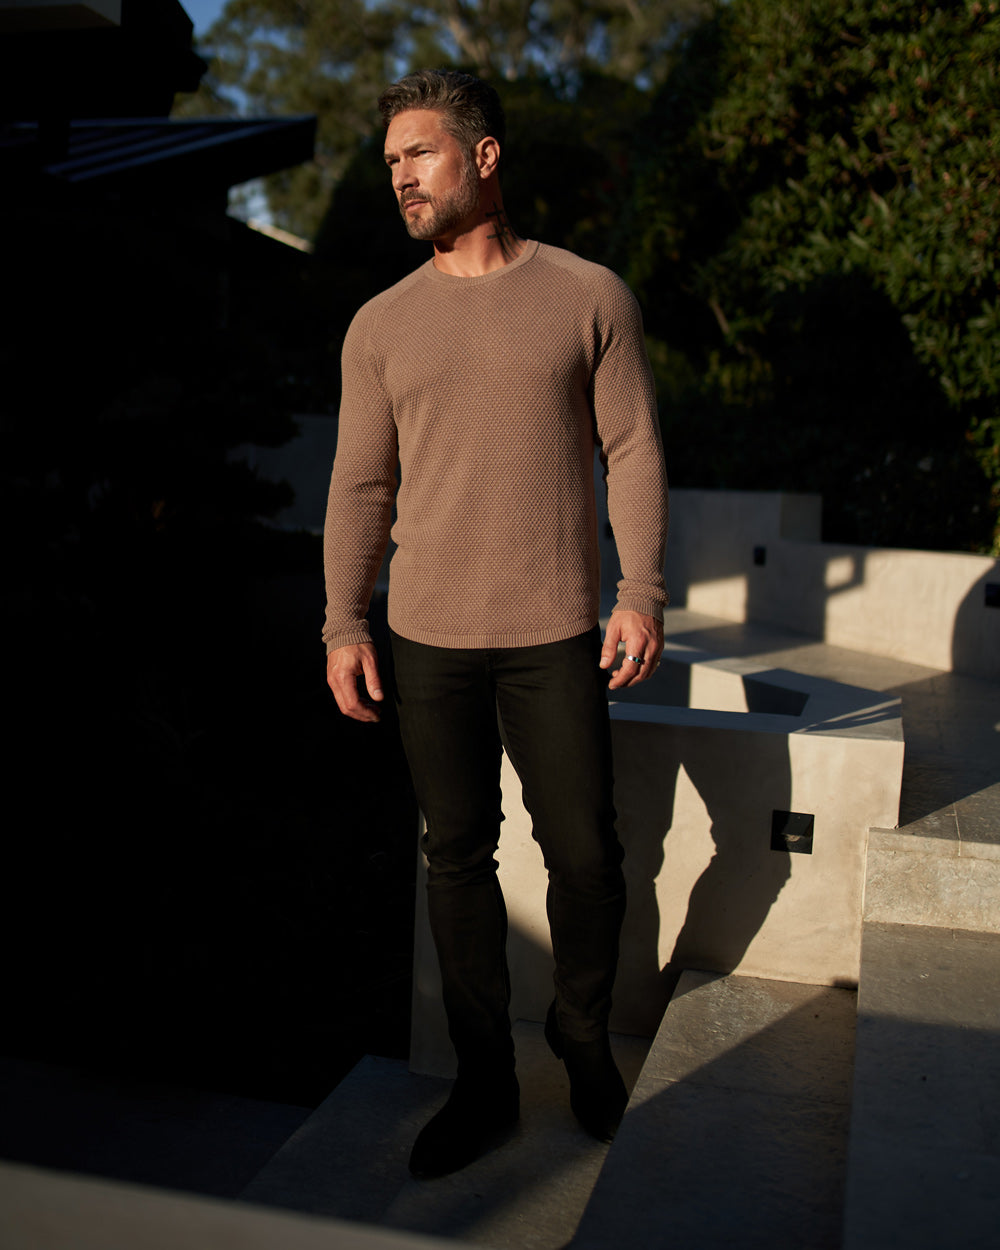 The Ripley Crew Neck Cotton & Cashmere FITTED Sweater - WESTON JON BOUCHÉR